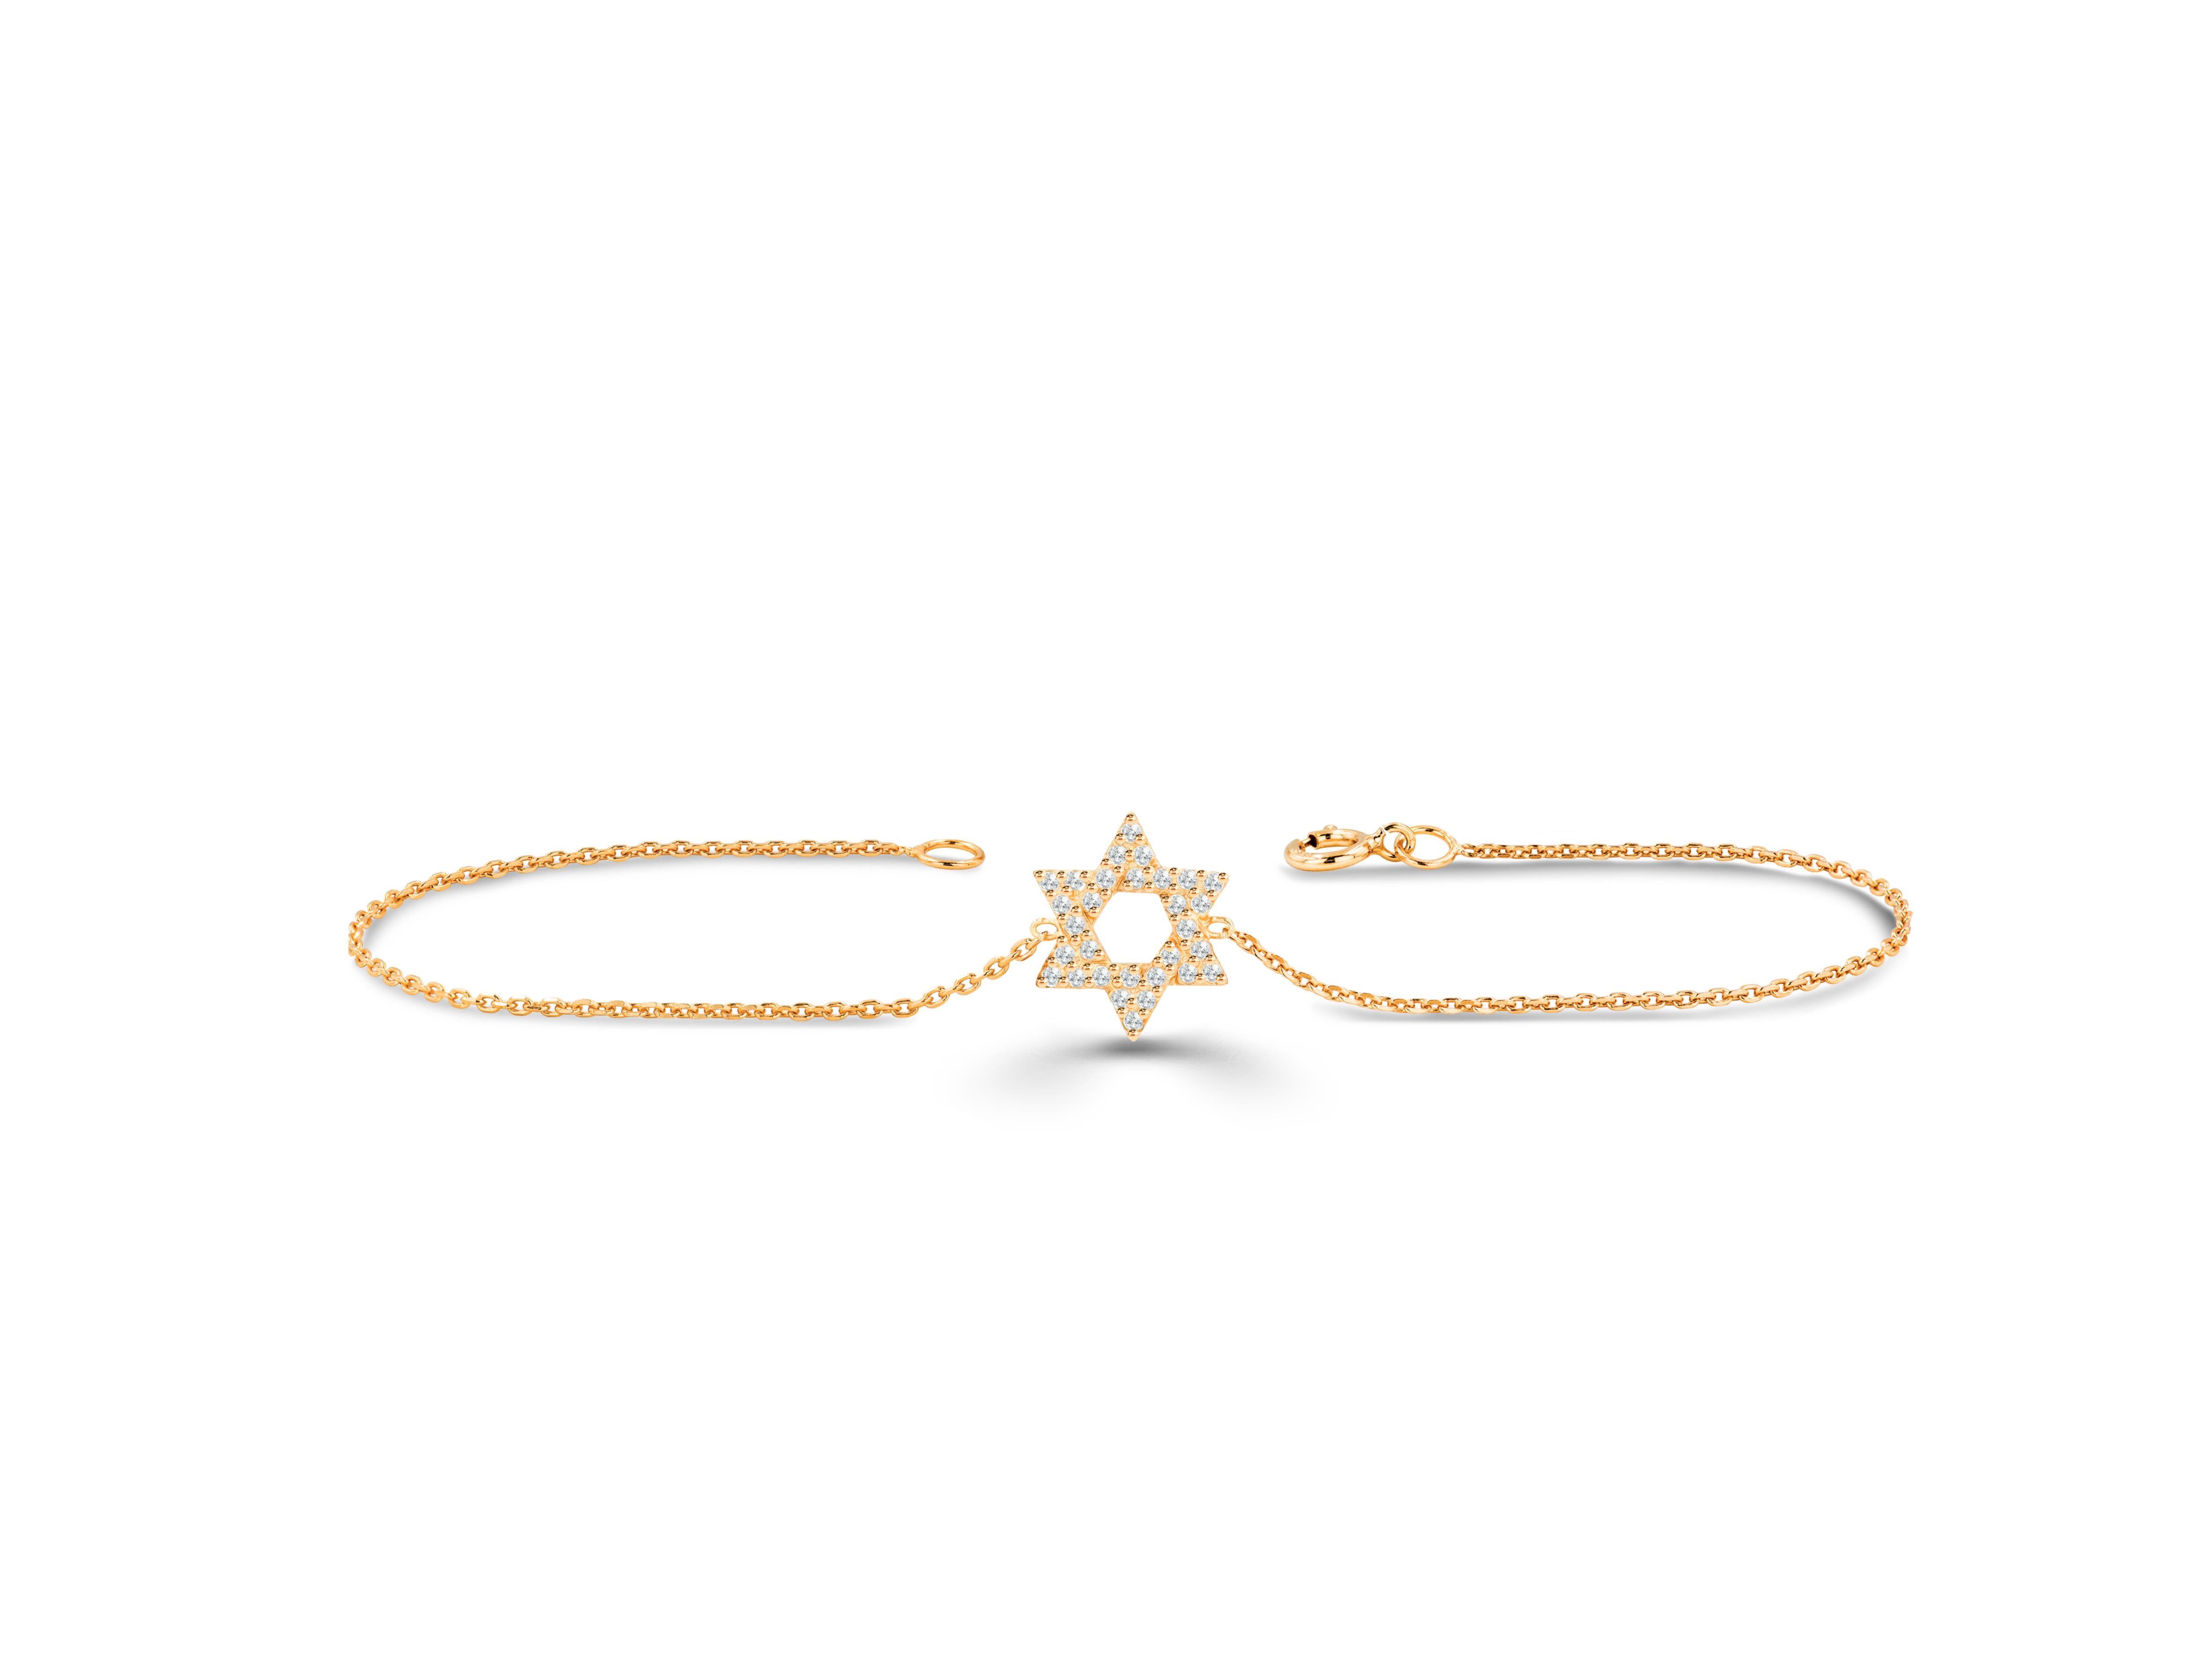 Beautiful and elegant, this Star of David bracelet is made with pure gold and consists of genuine and natural diamonds. This bracelet can be personalized in the Gold color you want. The diamonds are hand selected by me to ensure quality. This